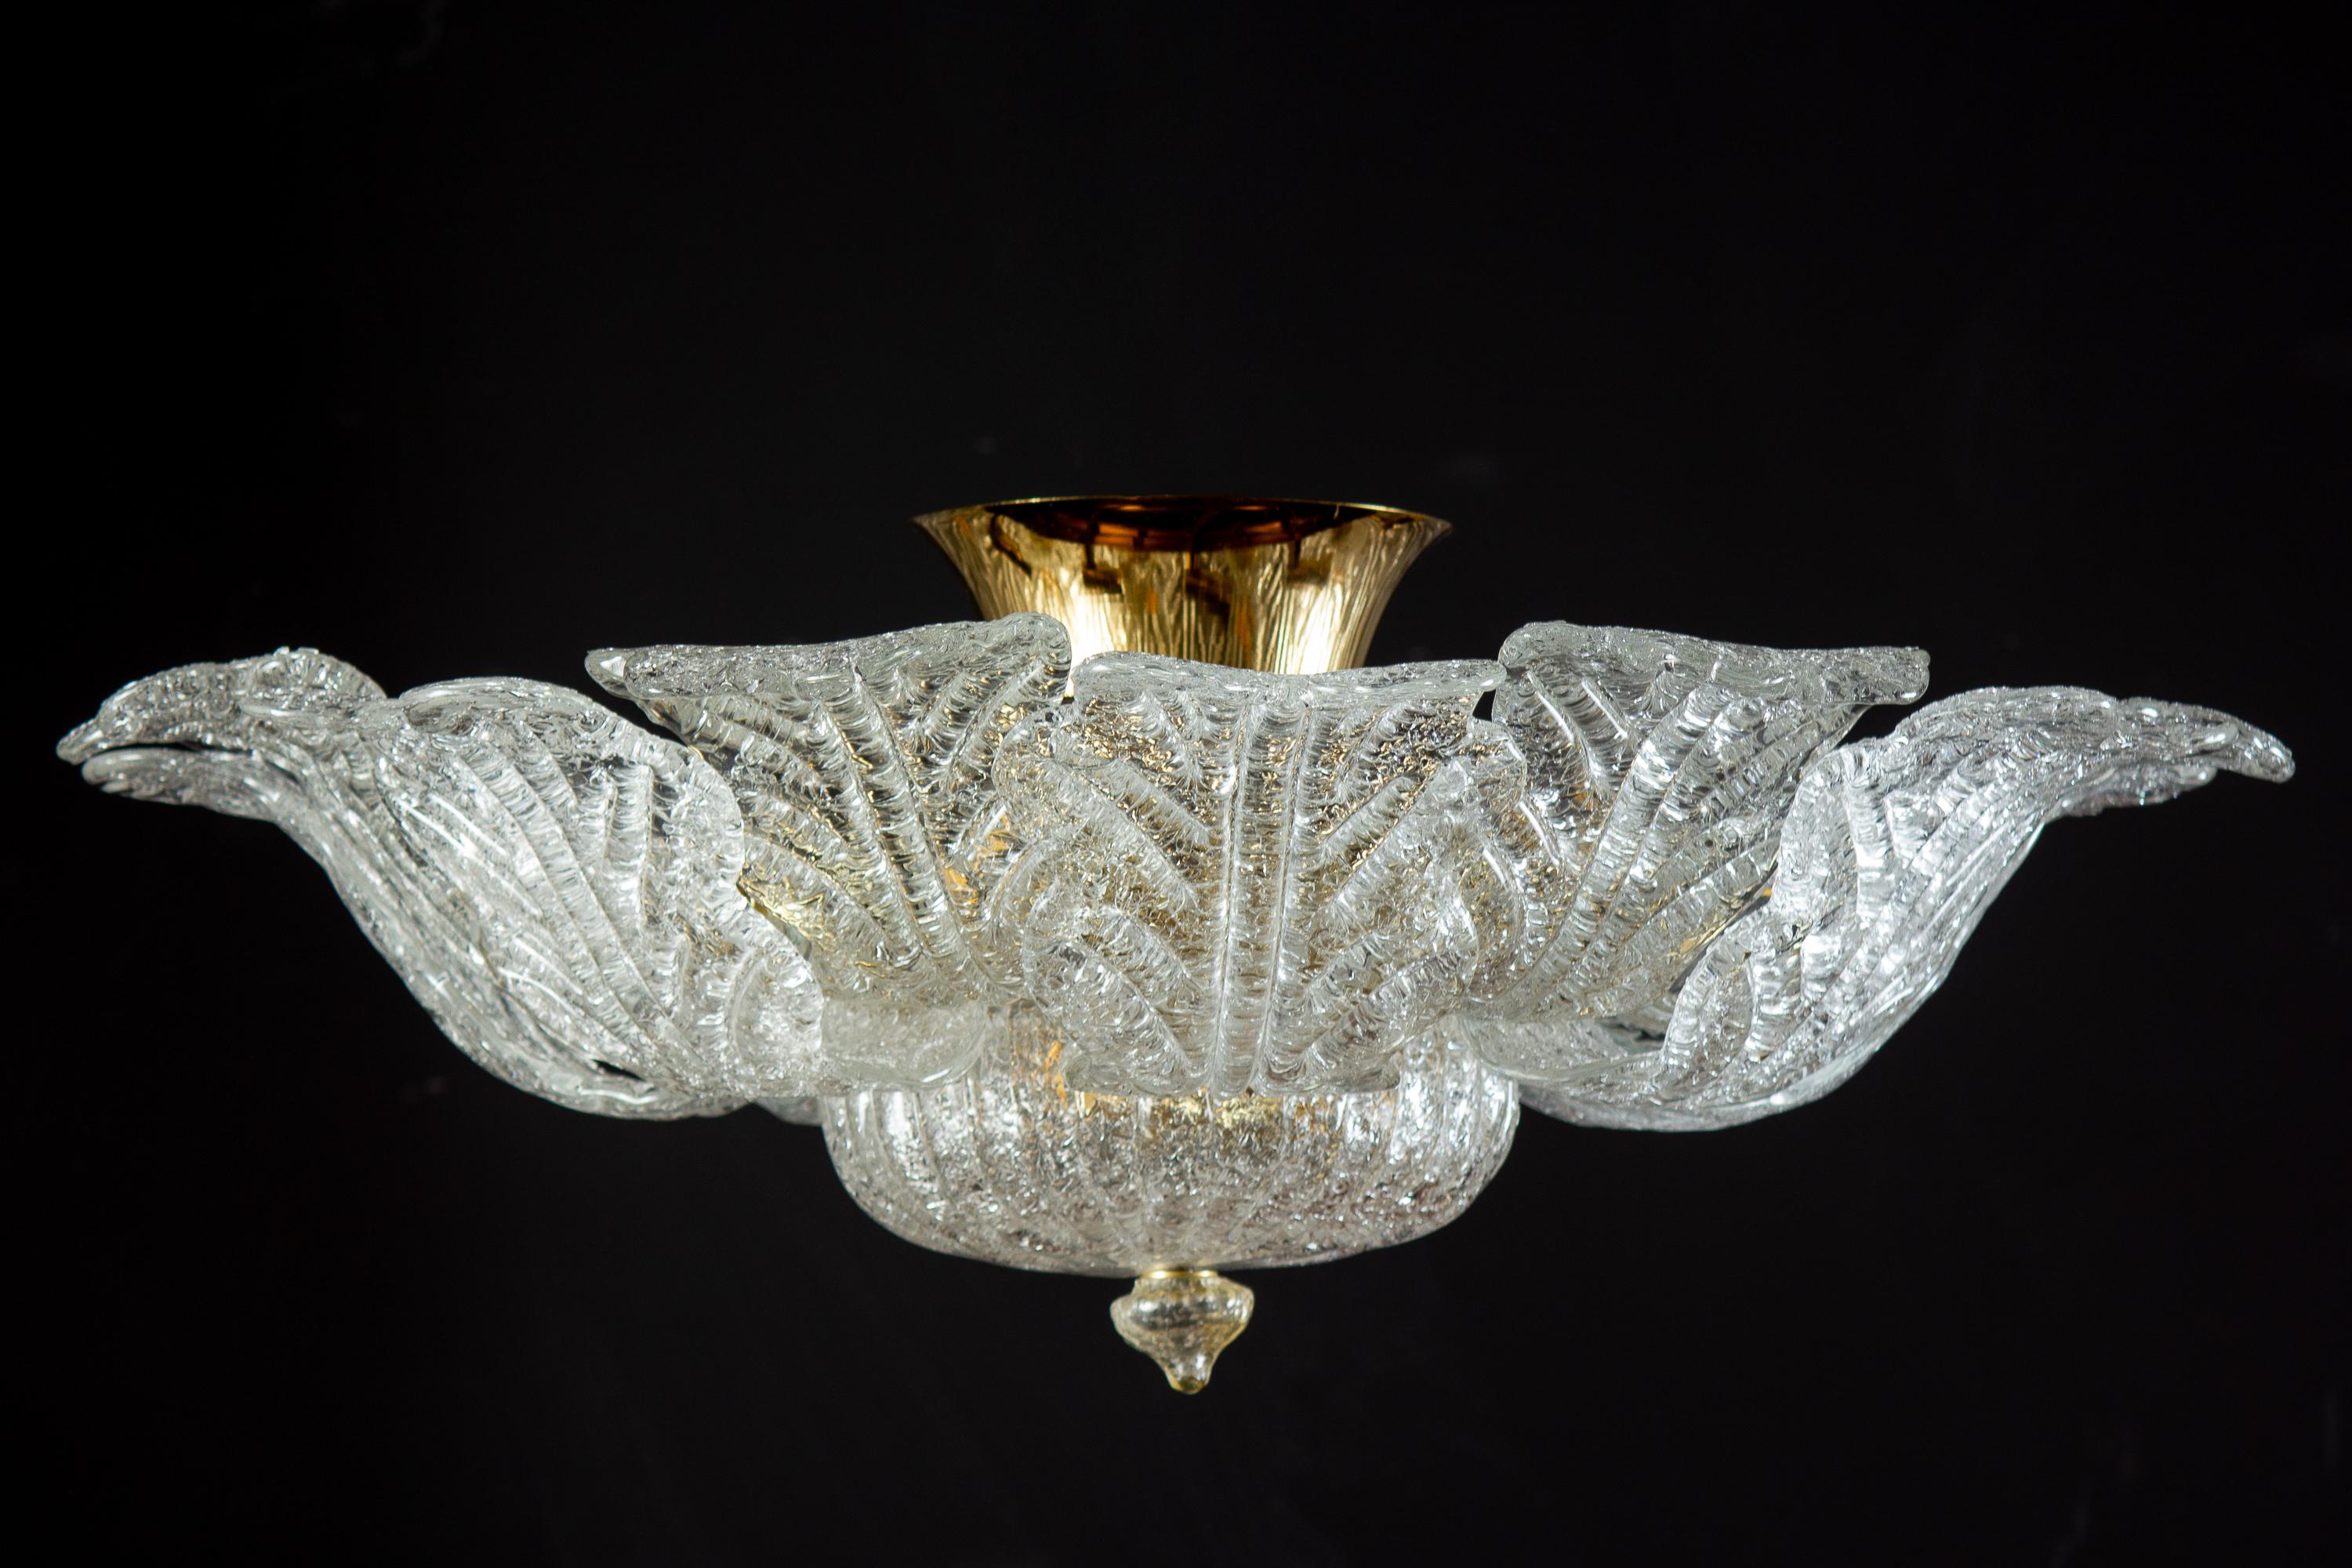 Fabulous Barovier & Toso Murano art glass ceiling lights whit a Brass frame ,made of precious hand blown ice color leaves glasses . A glass bowl as a bottom. This beauty has the look of a precious big flower. Cleaned and re-wired, in full working